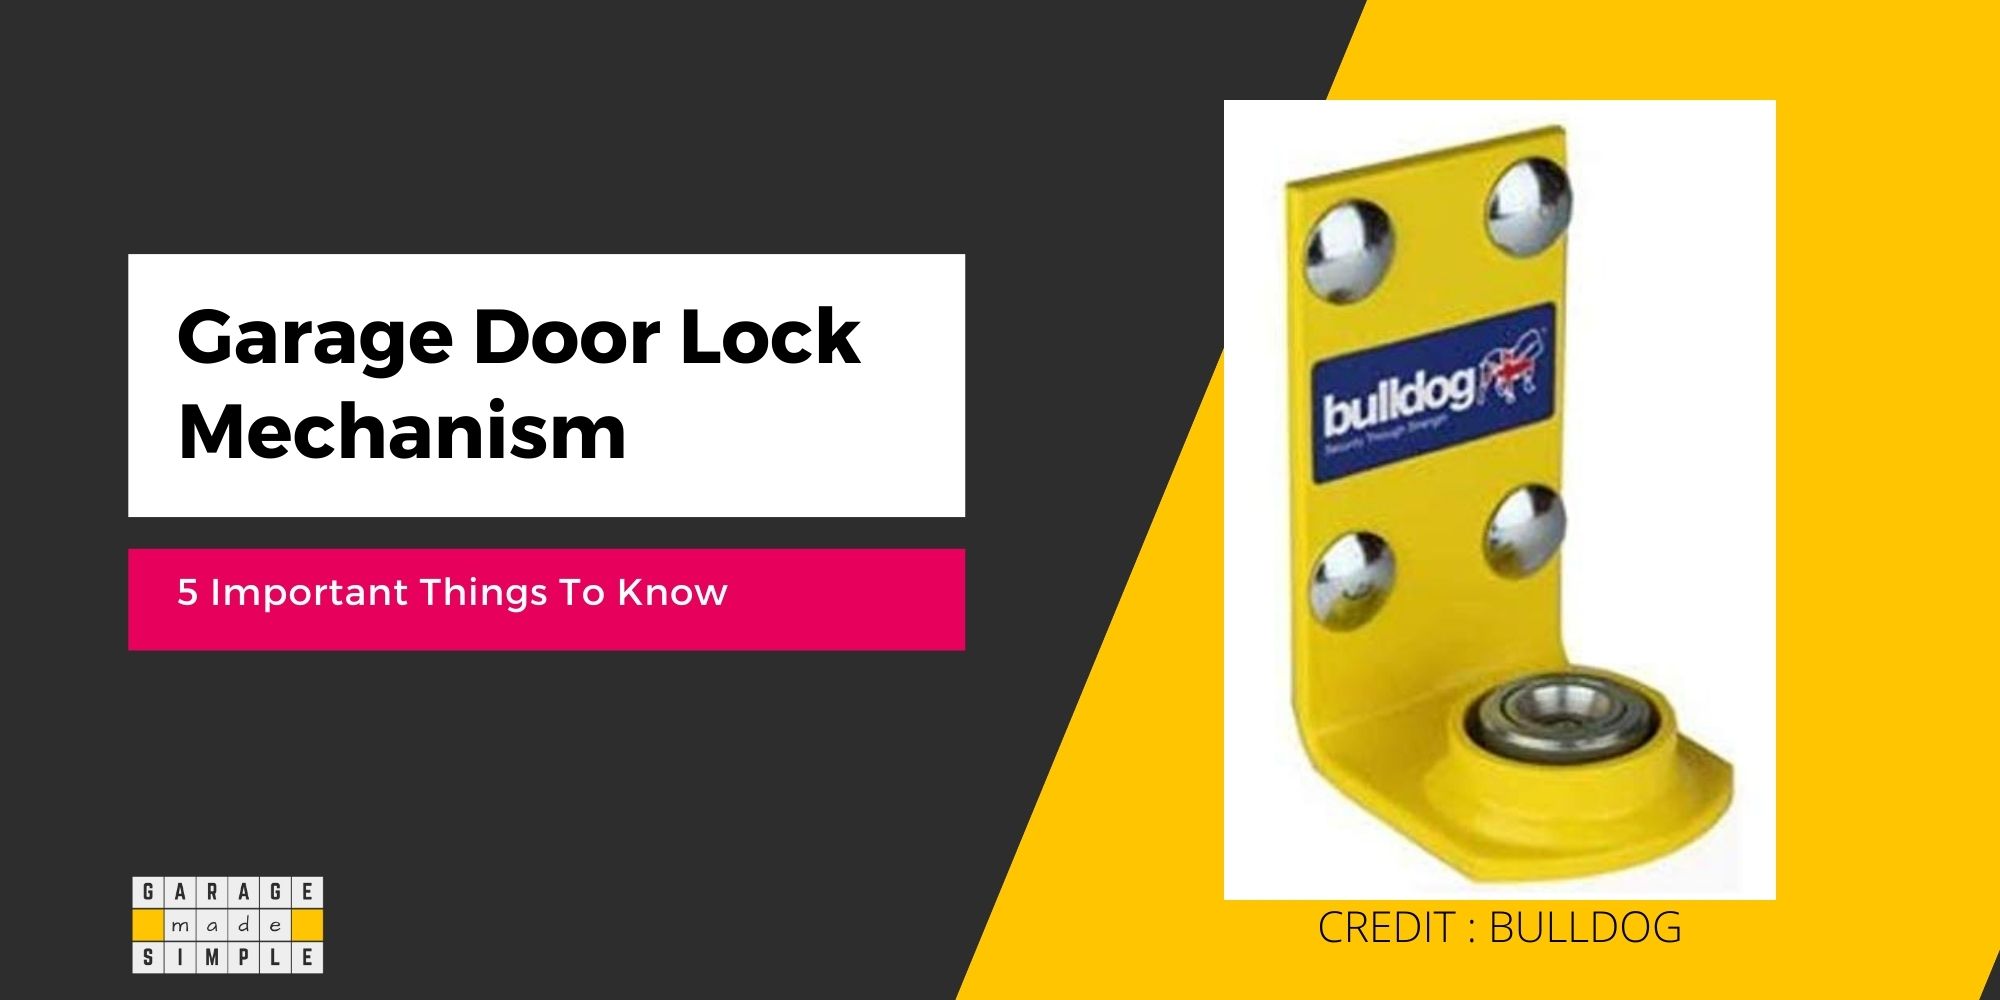 5 Important Things To Know About Garage Door Lock Mechanism